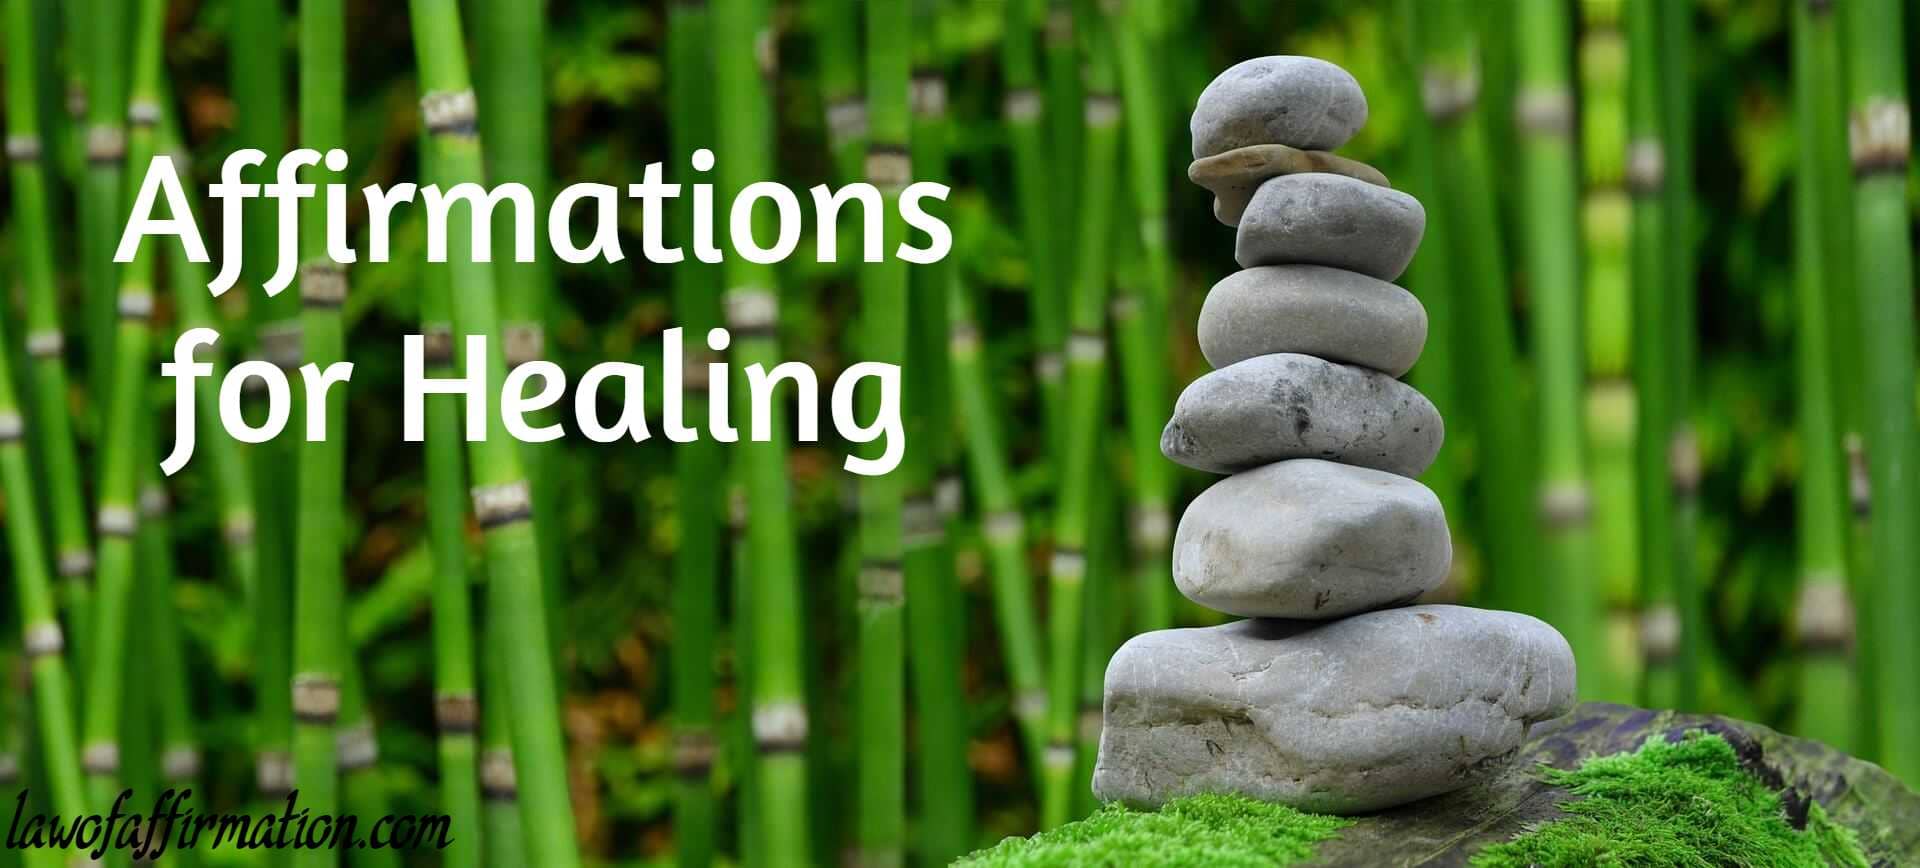 Affirmations-for-healing